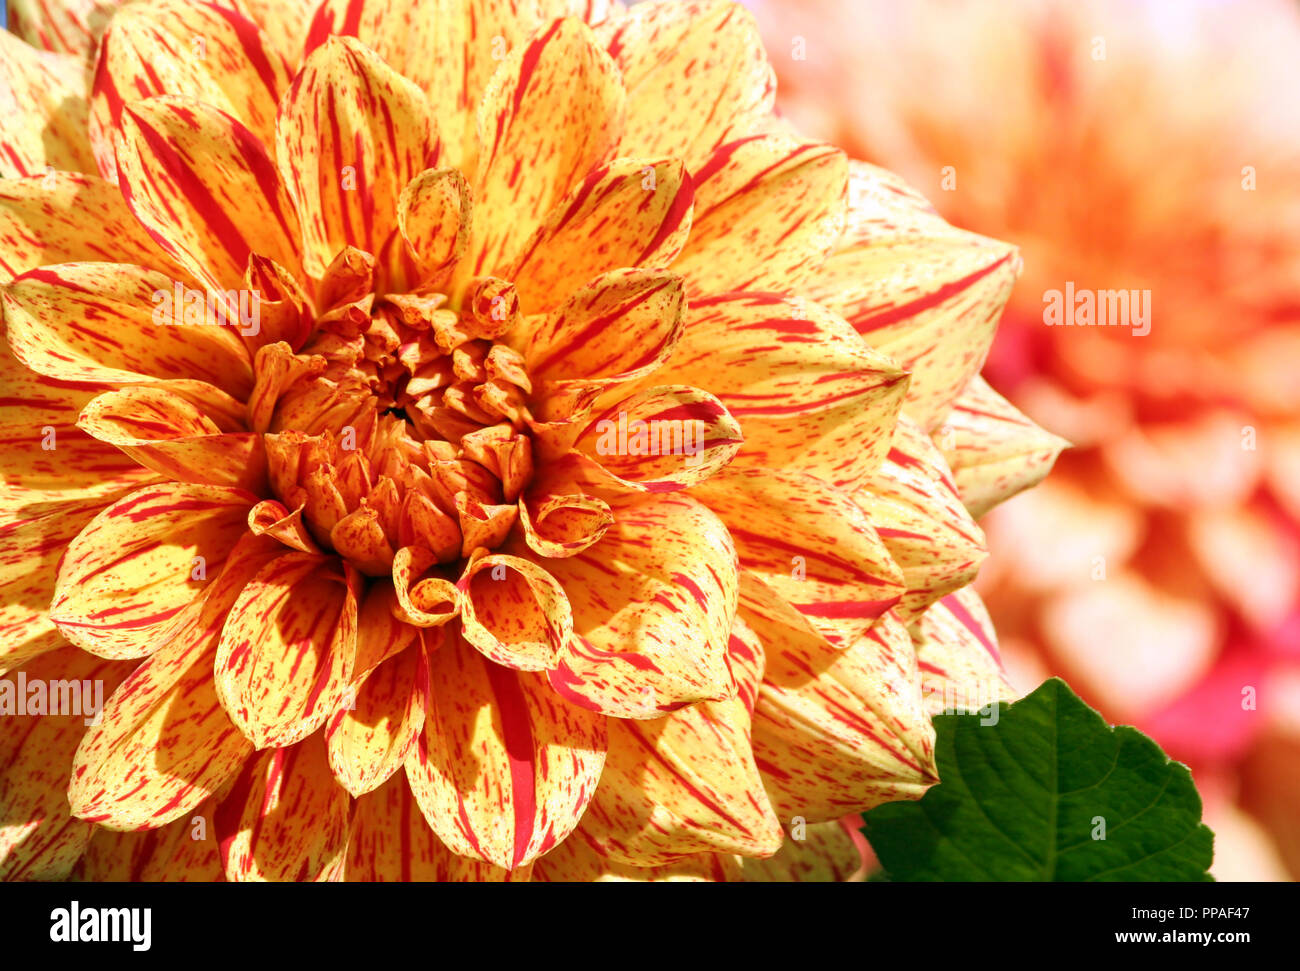 dahlia elijah mason asteraceae variety of chrysanthemum, bright yellow-orange flowers with interspersed red dots and long strips,  single large plant Stock Photo